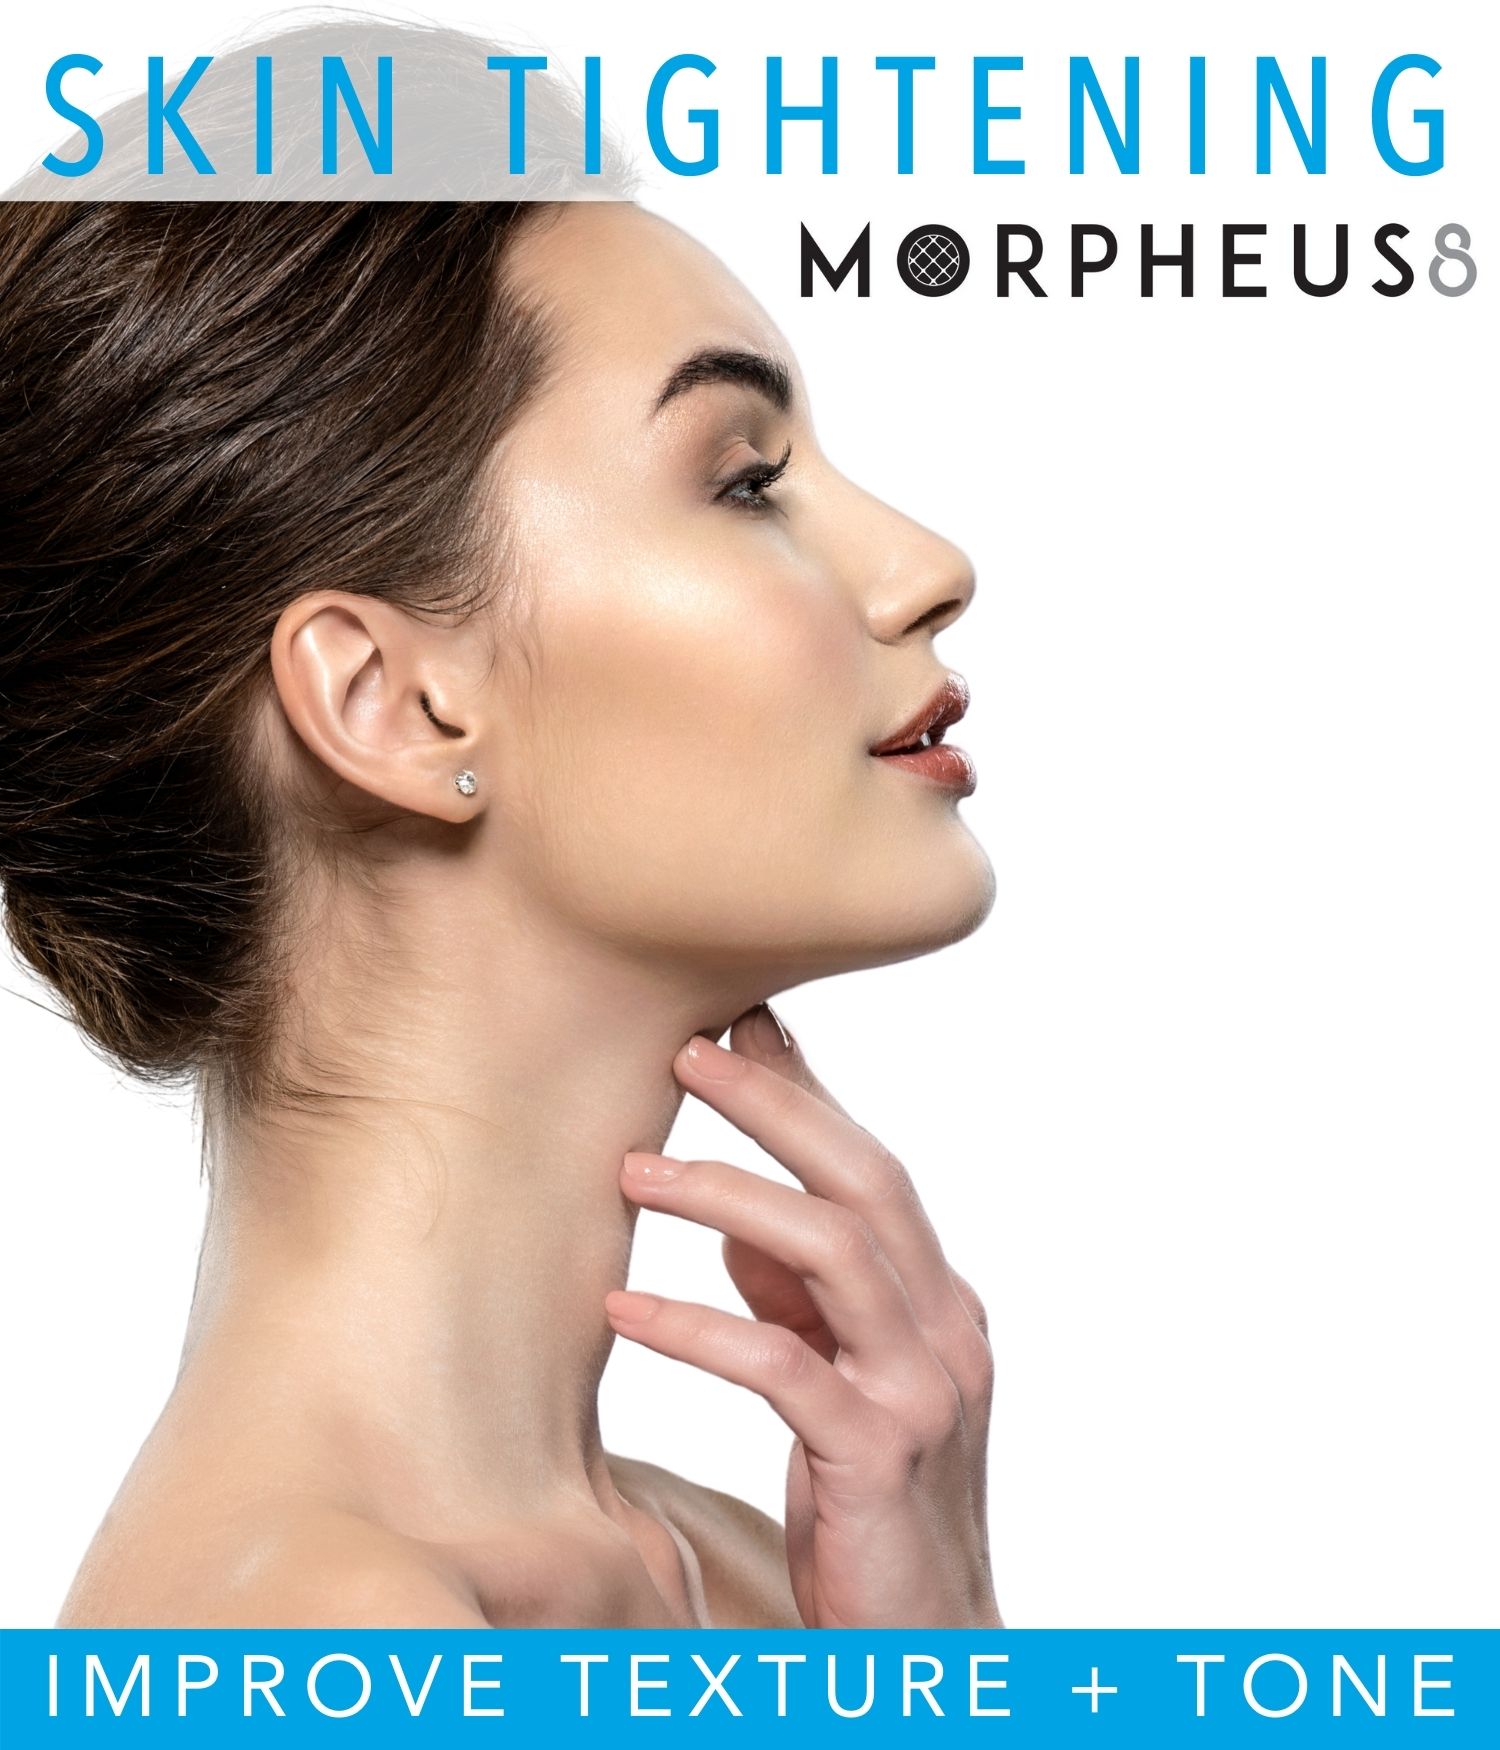 Woman with beautiful skin holding her neck promoting a Morpheus 8 treatment.